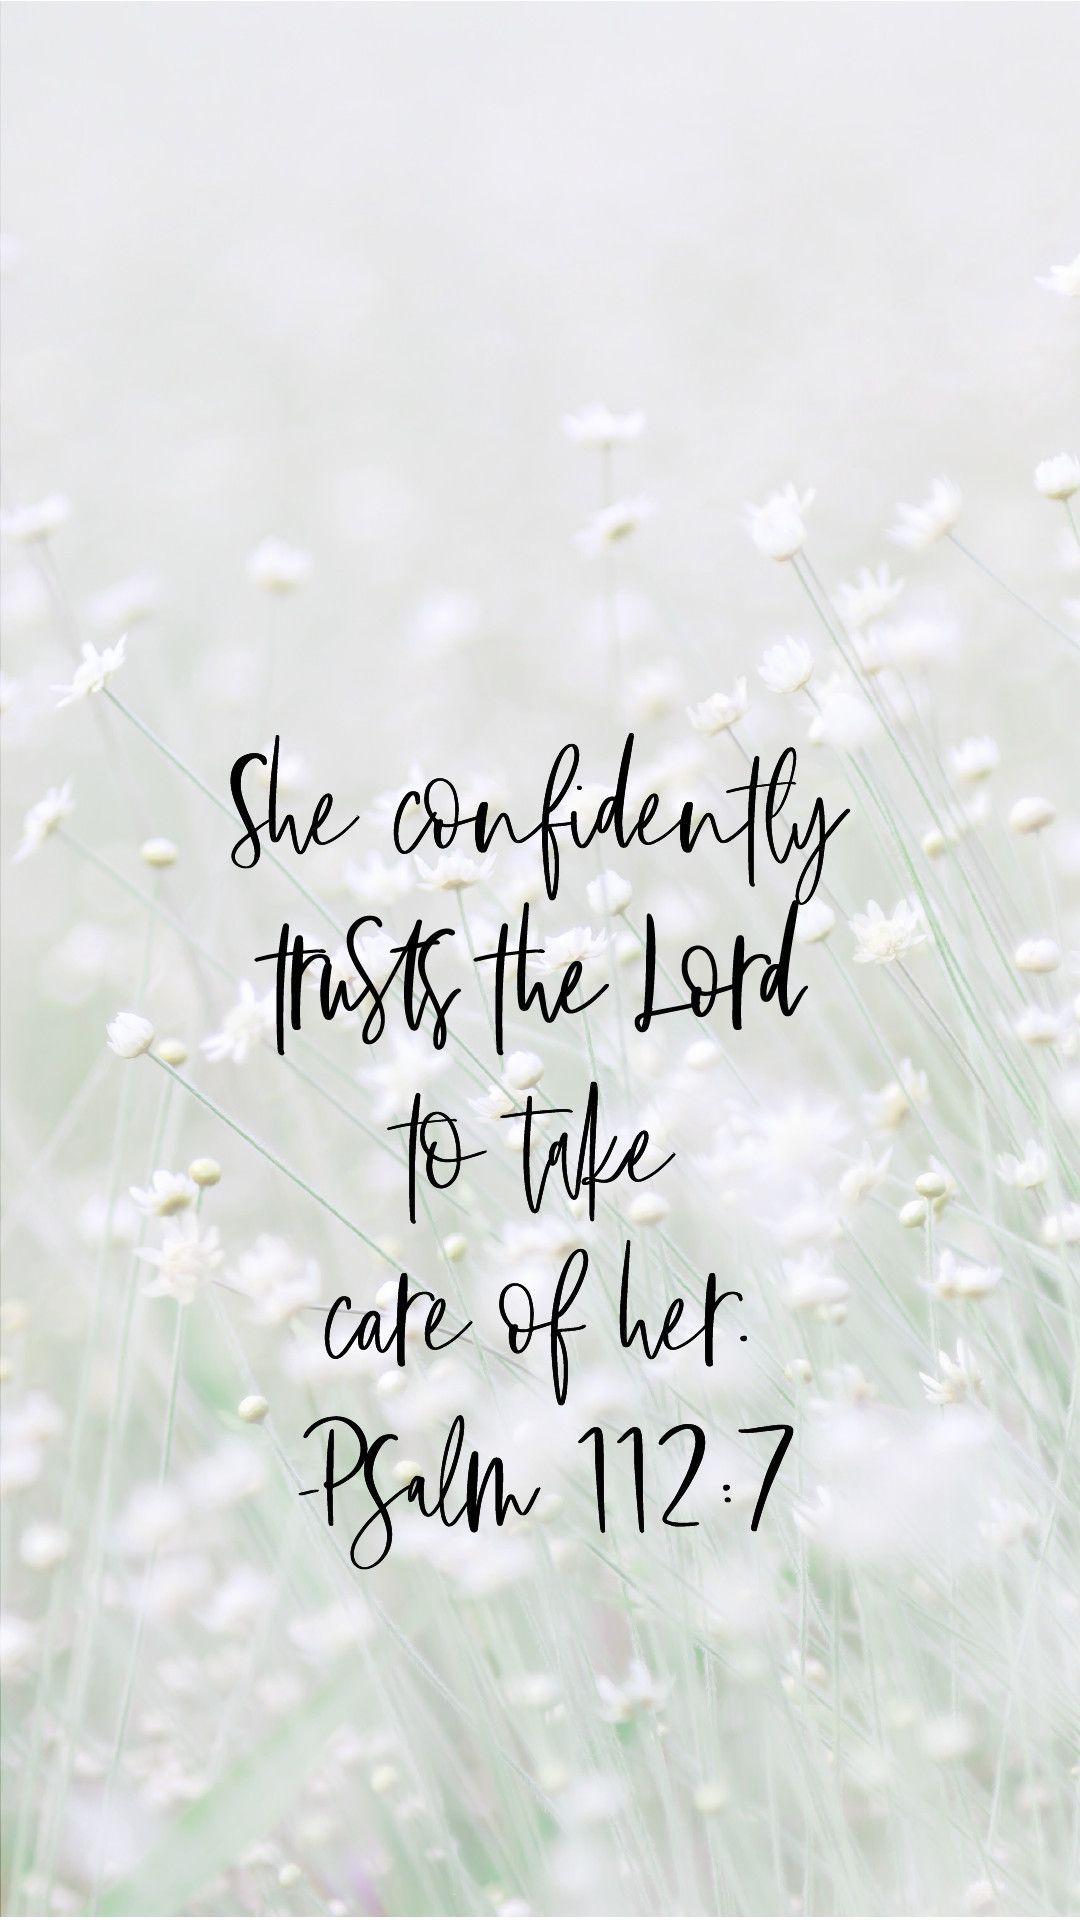 Bible Quote Phone Wallpaper Free Bible Quote Phone Background